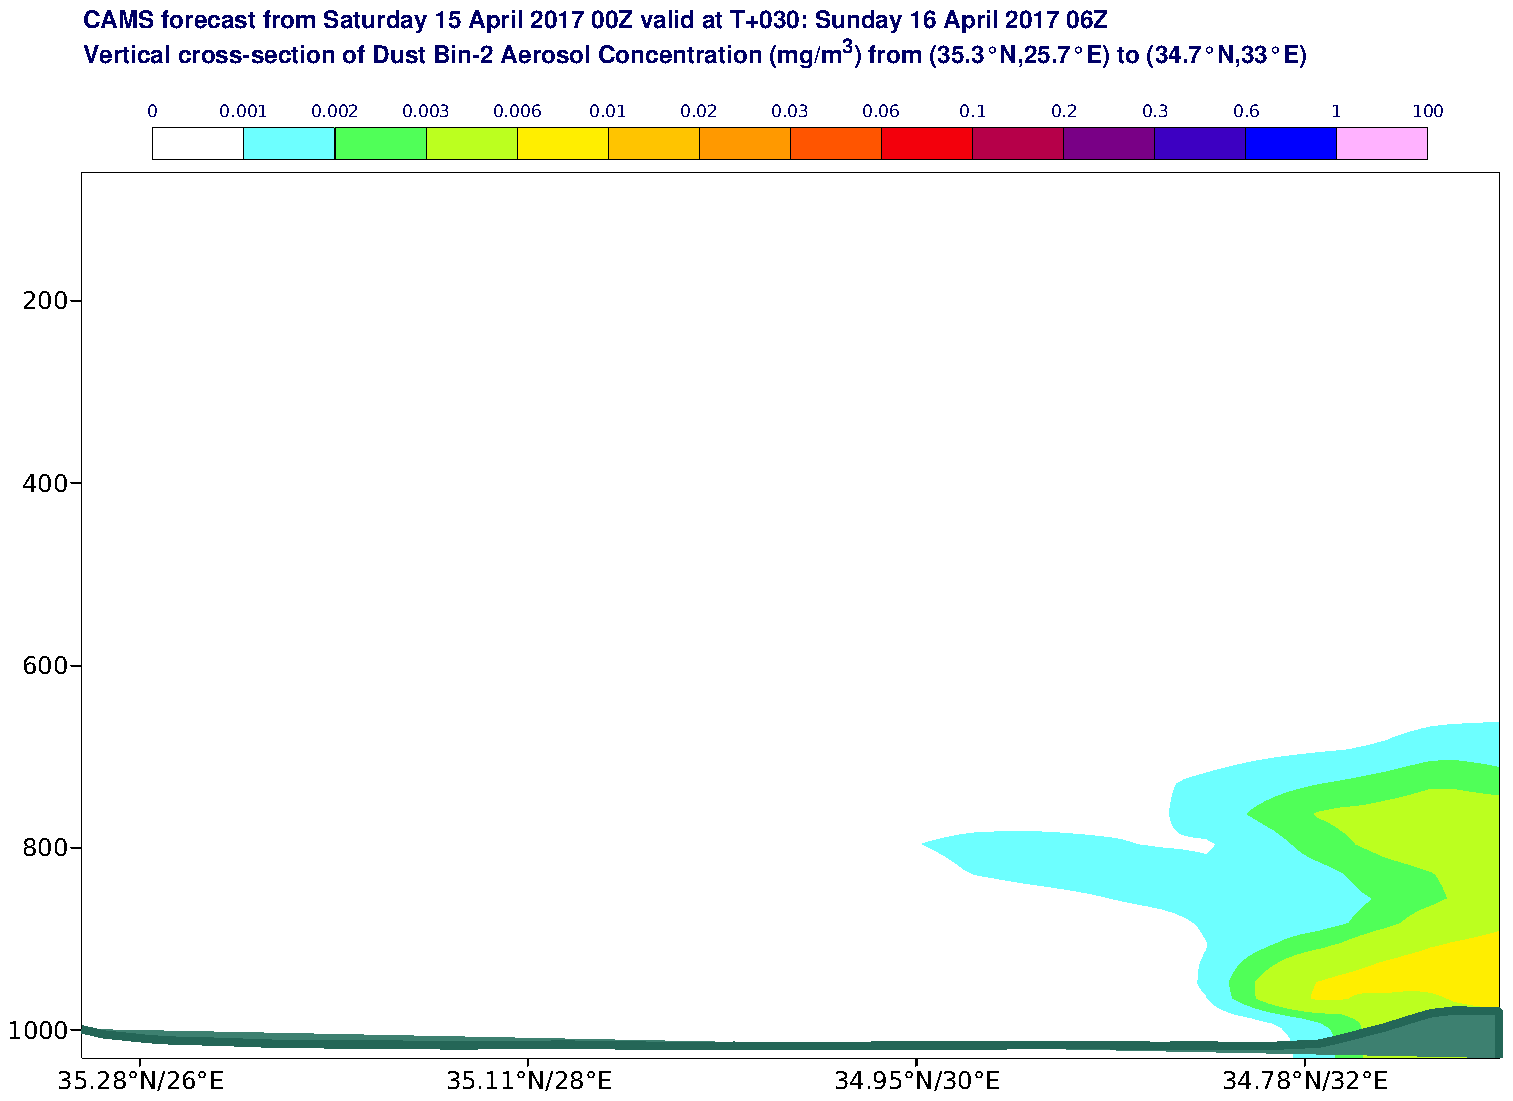 Vertical cross-section of Dust Bin-2 Aerosol Concentration (mg/m3) valid at T30 - 2017-04-16 06:00